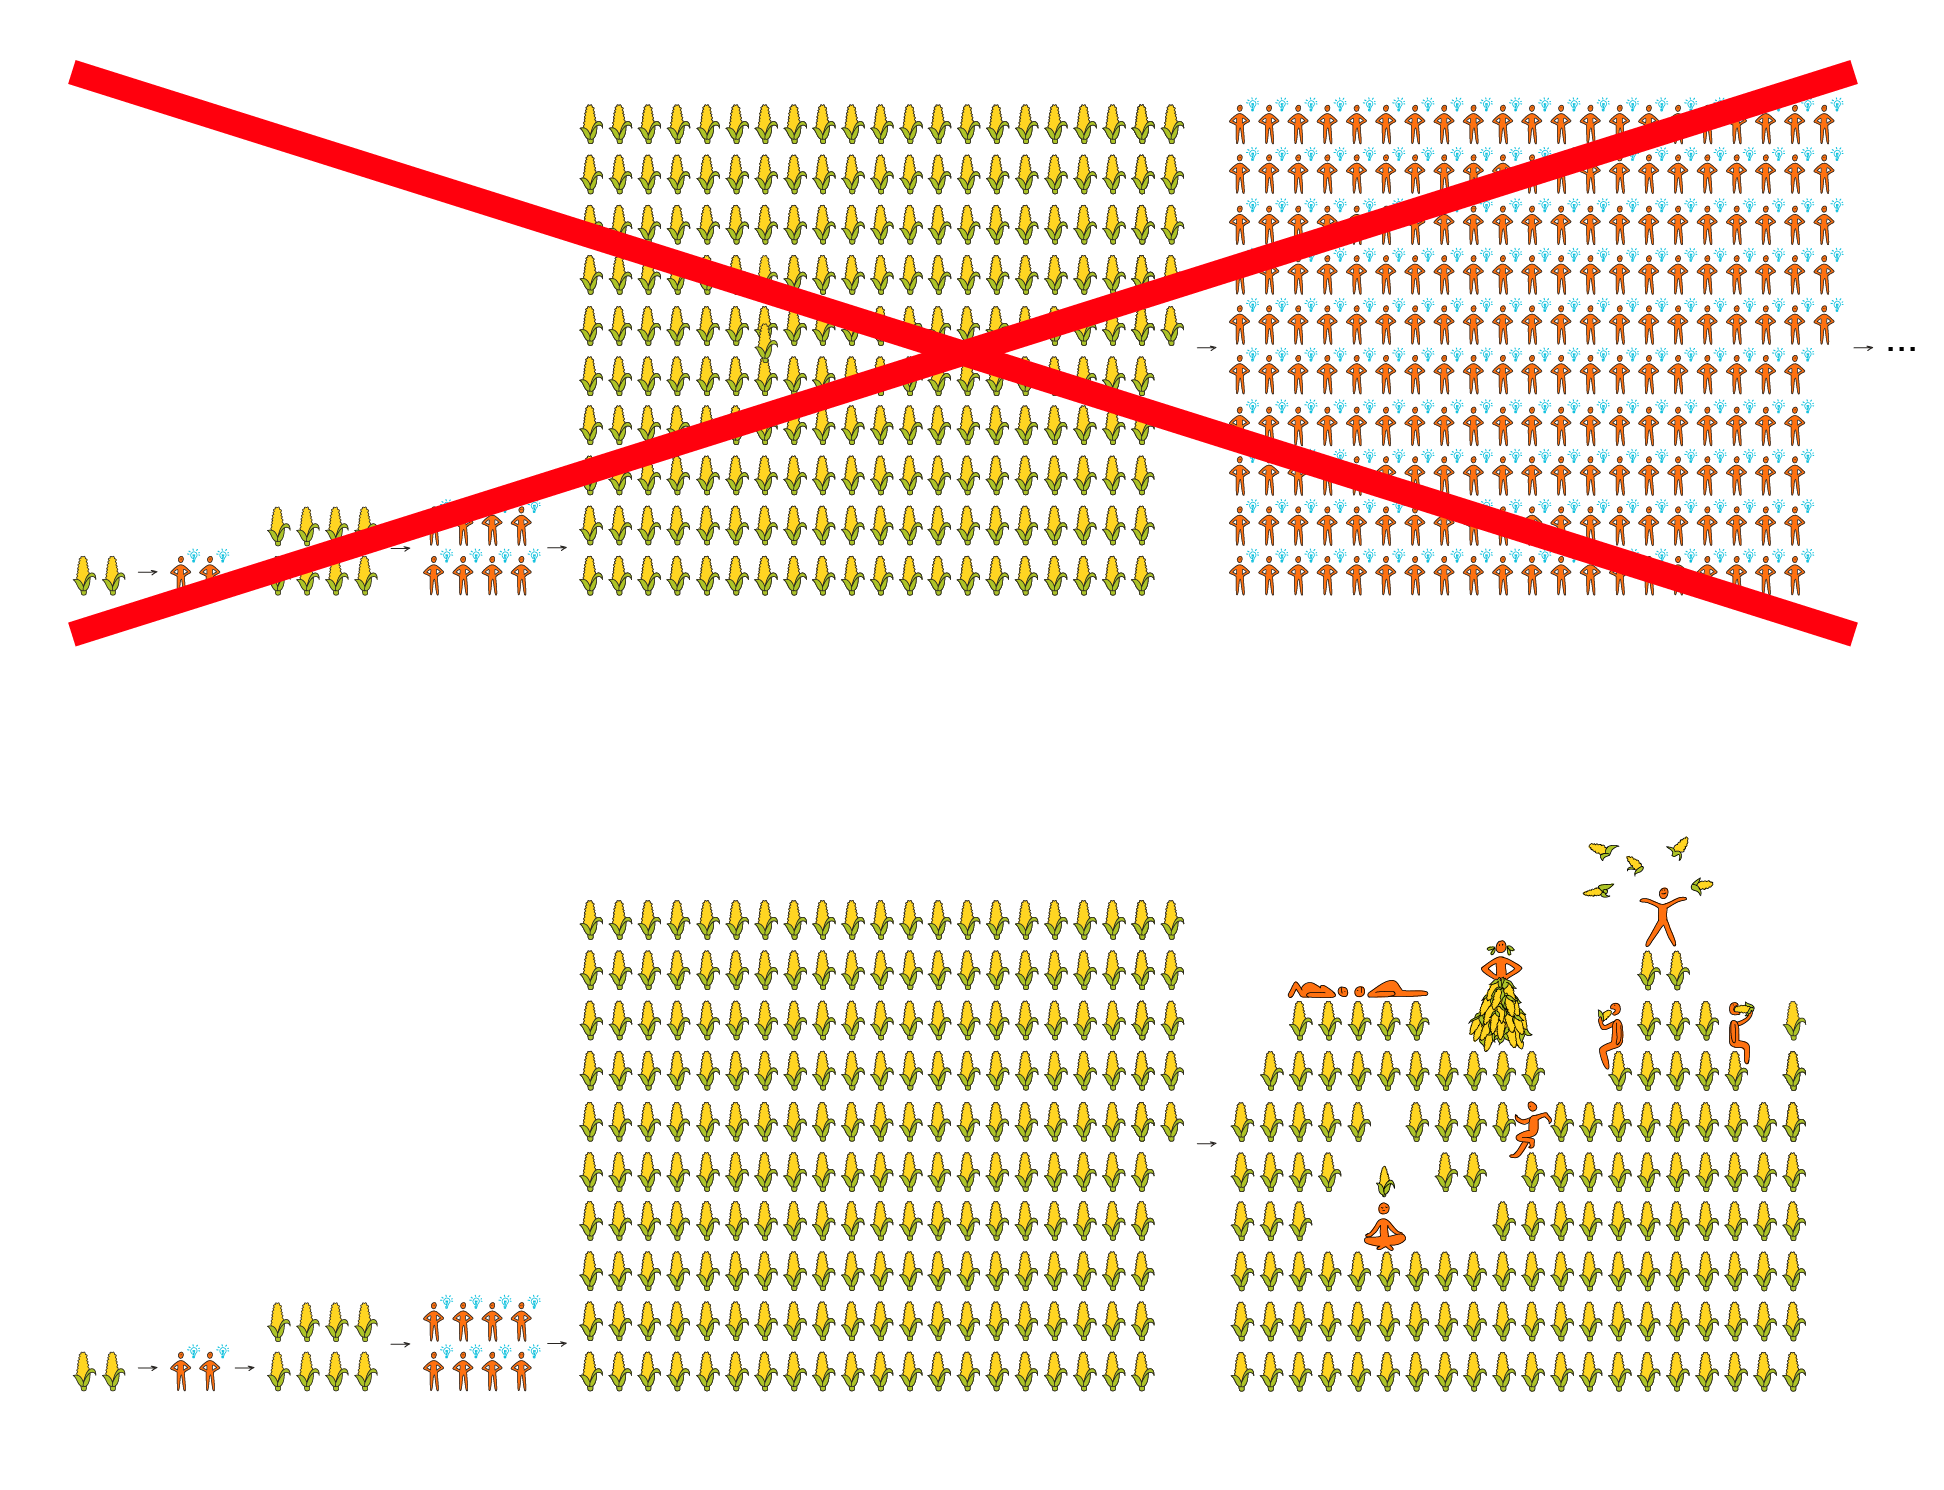 Same as previous diagram, but instead of more corn leading to more people, it leads to the same number of people enjoying their boatload of corn - corn juggling, corn slides, corn feasts, etc.